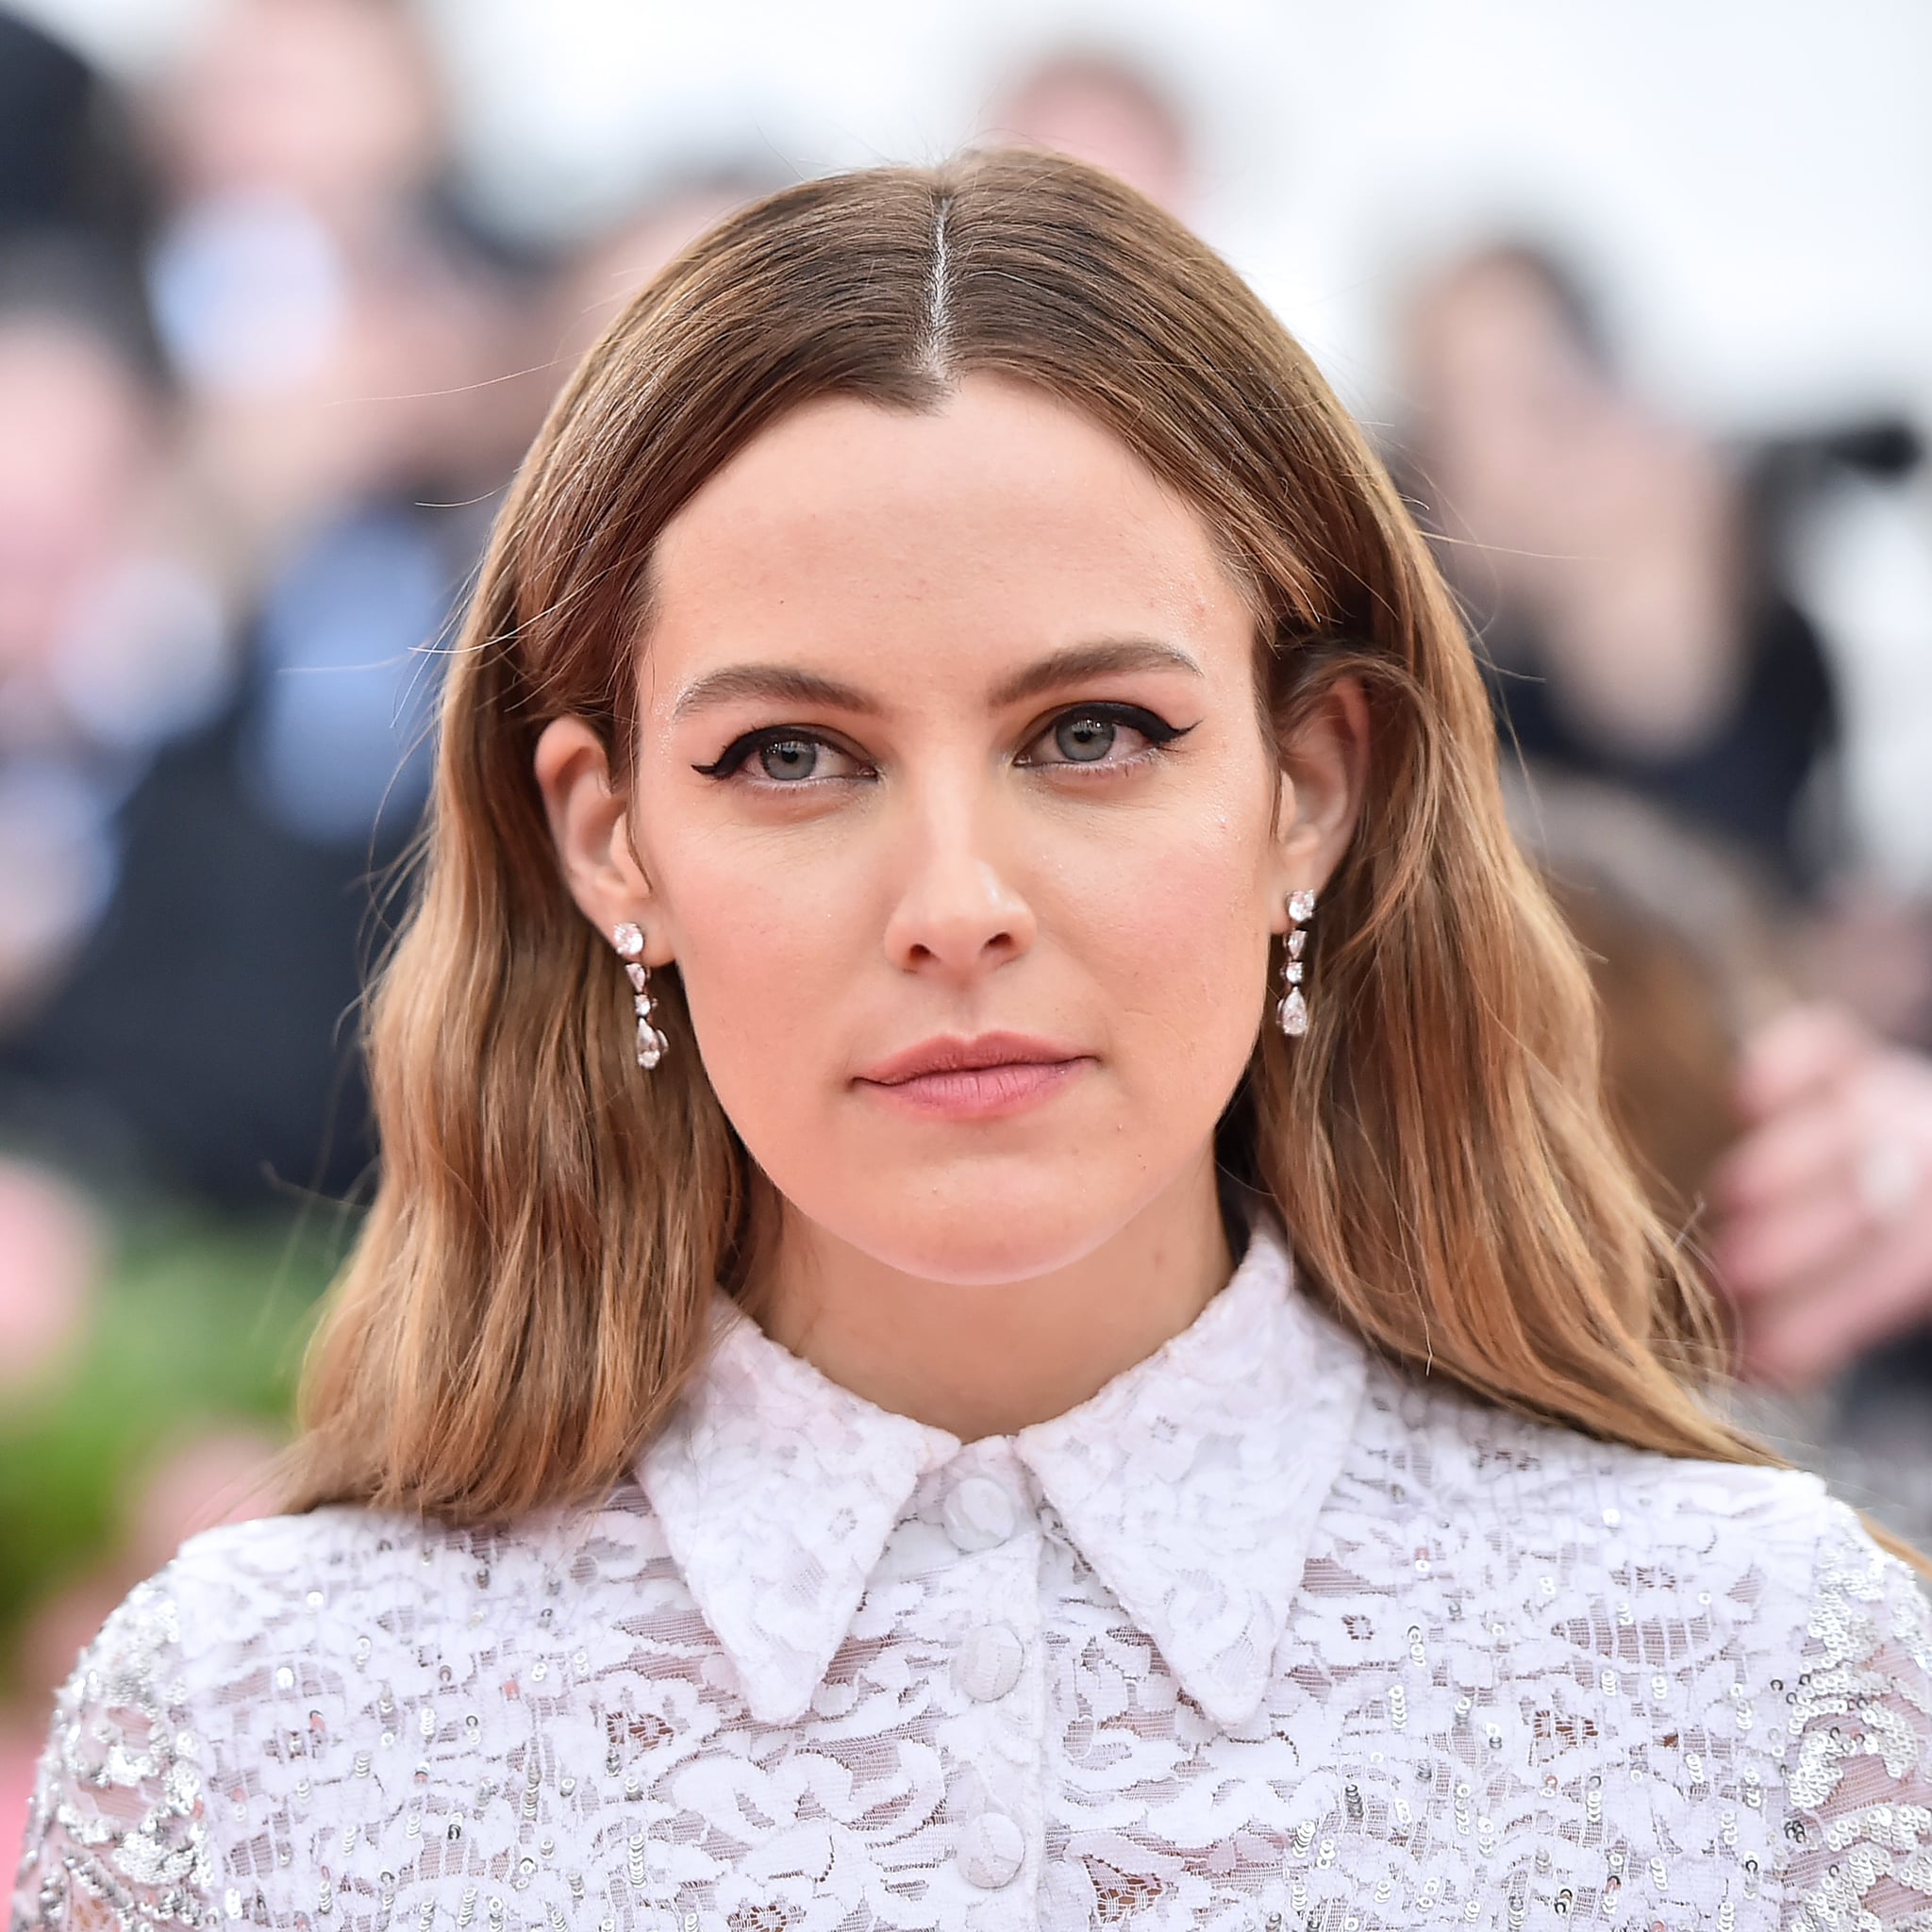 Riley Keough reveals she welcomed a daughter last year in speech